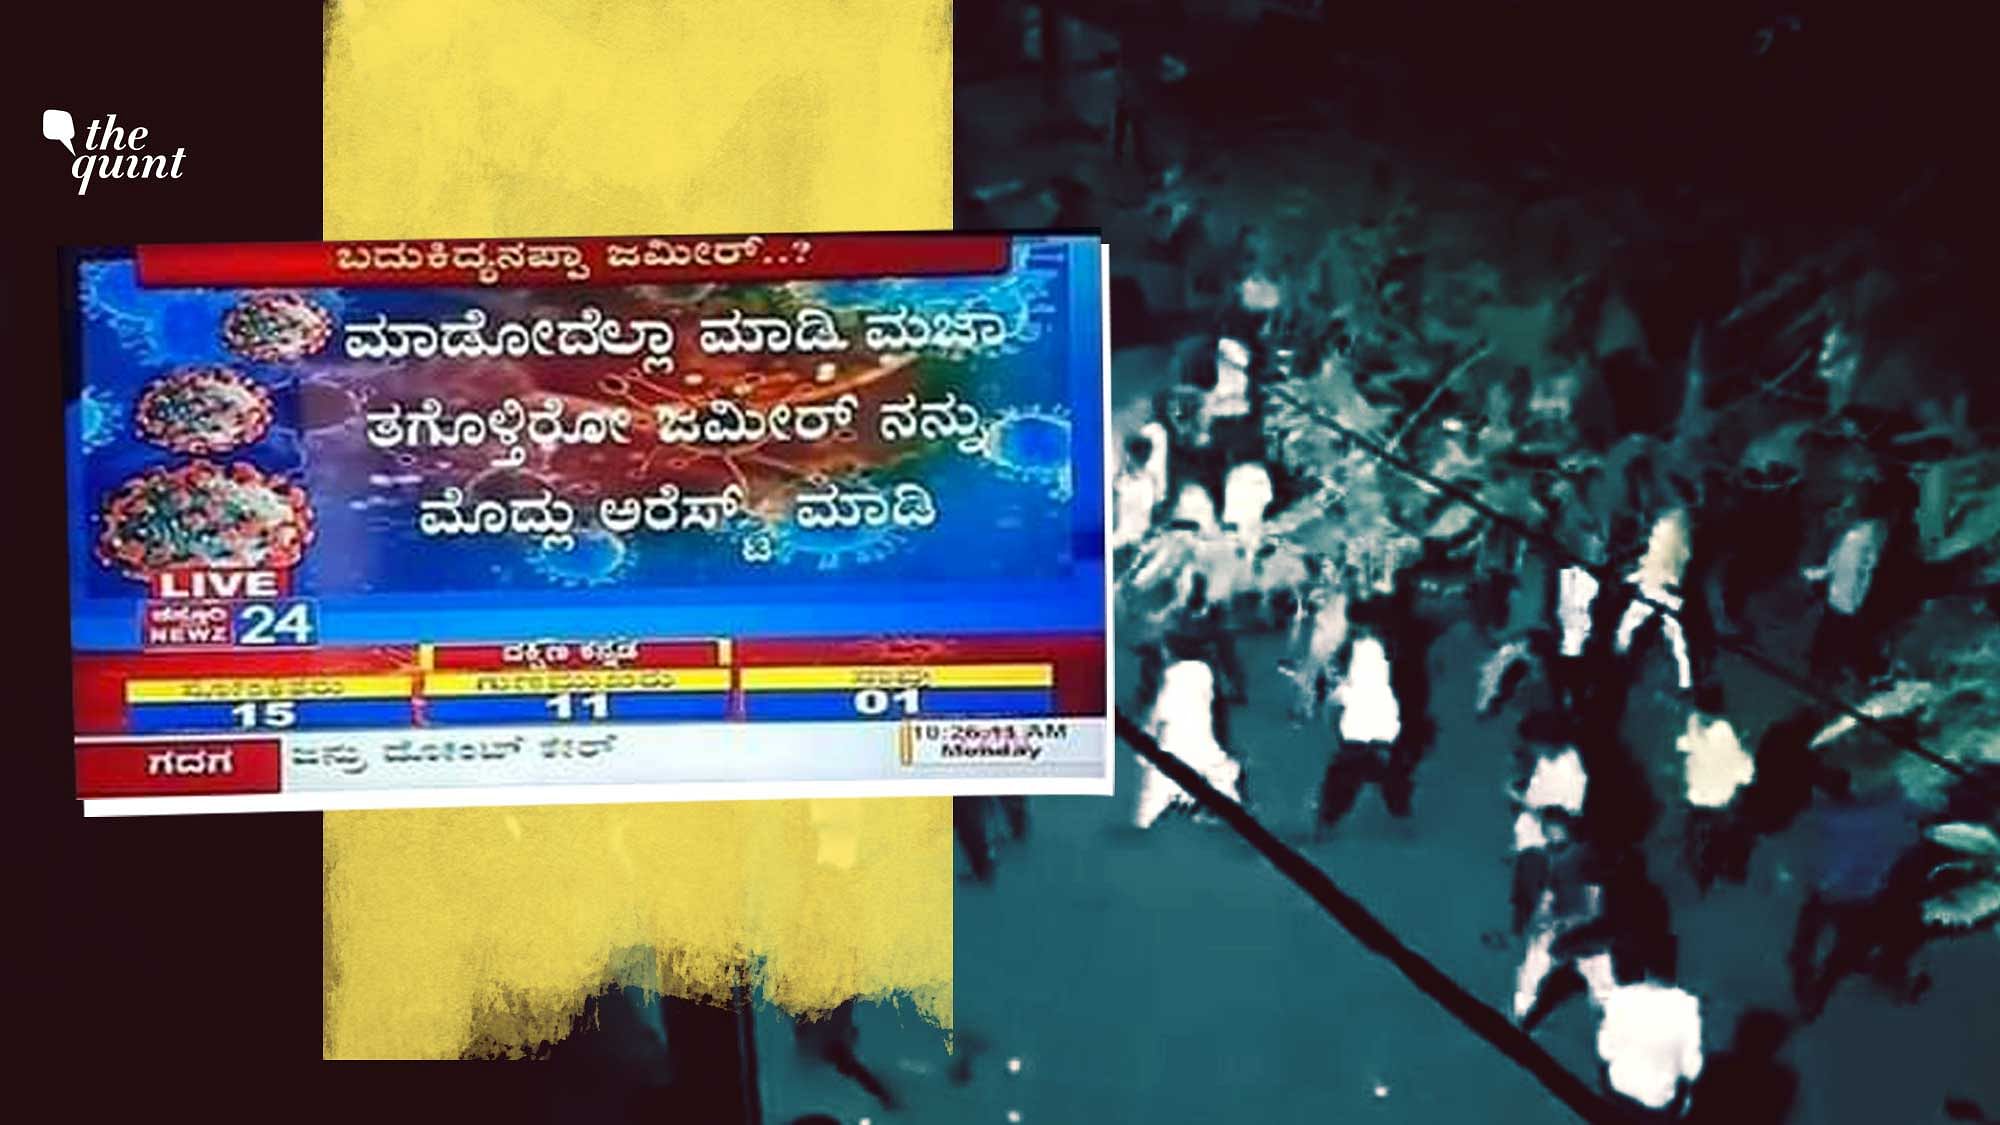 From calling those accused of causing the violence monsters to lambasting local MLA Zameer Ahmed for asking questions of the authorities, local Kannada channels changed the narrative of coverage in a distinct attempt to make it communal.&nbsp;